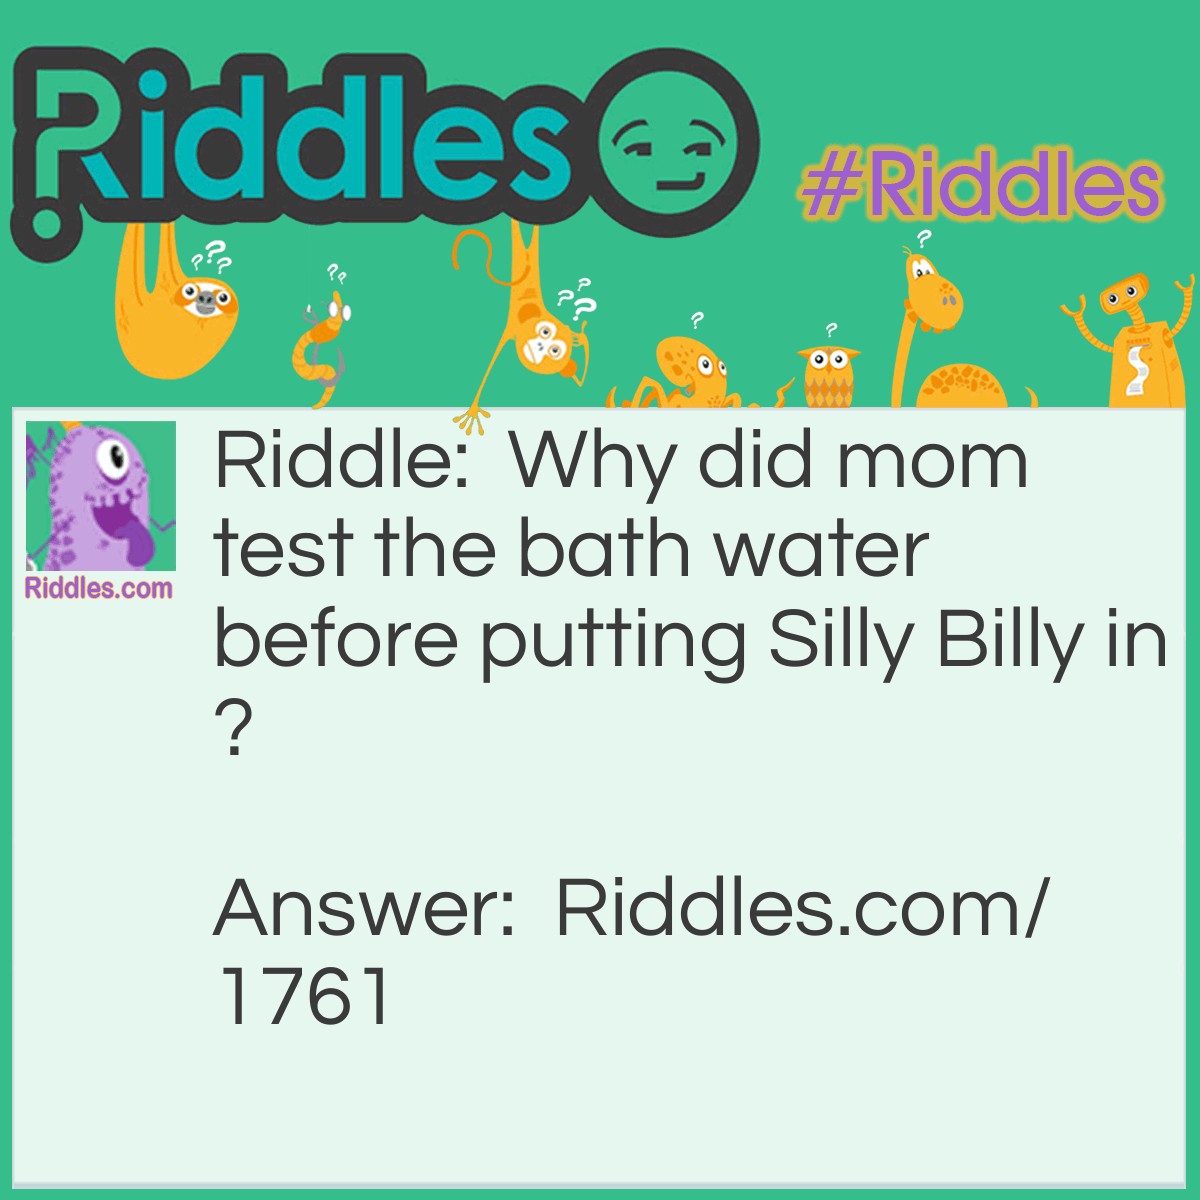 Riddle: Why did mom test the bath water before putting <a href="../../../funny-riddles">Silly</a> Billy in? Answer: To prevent son-burn.